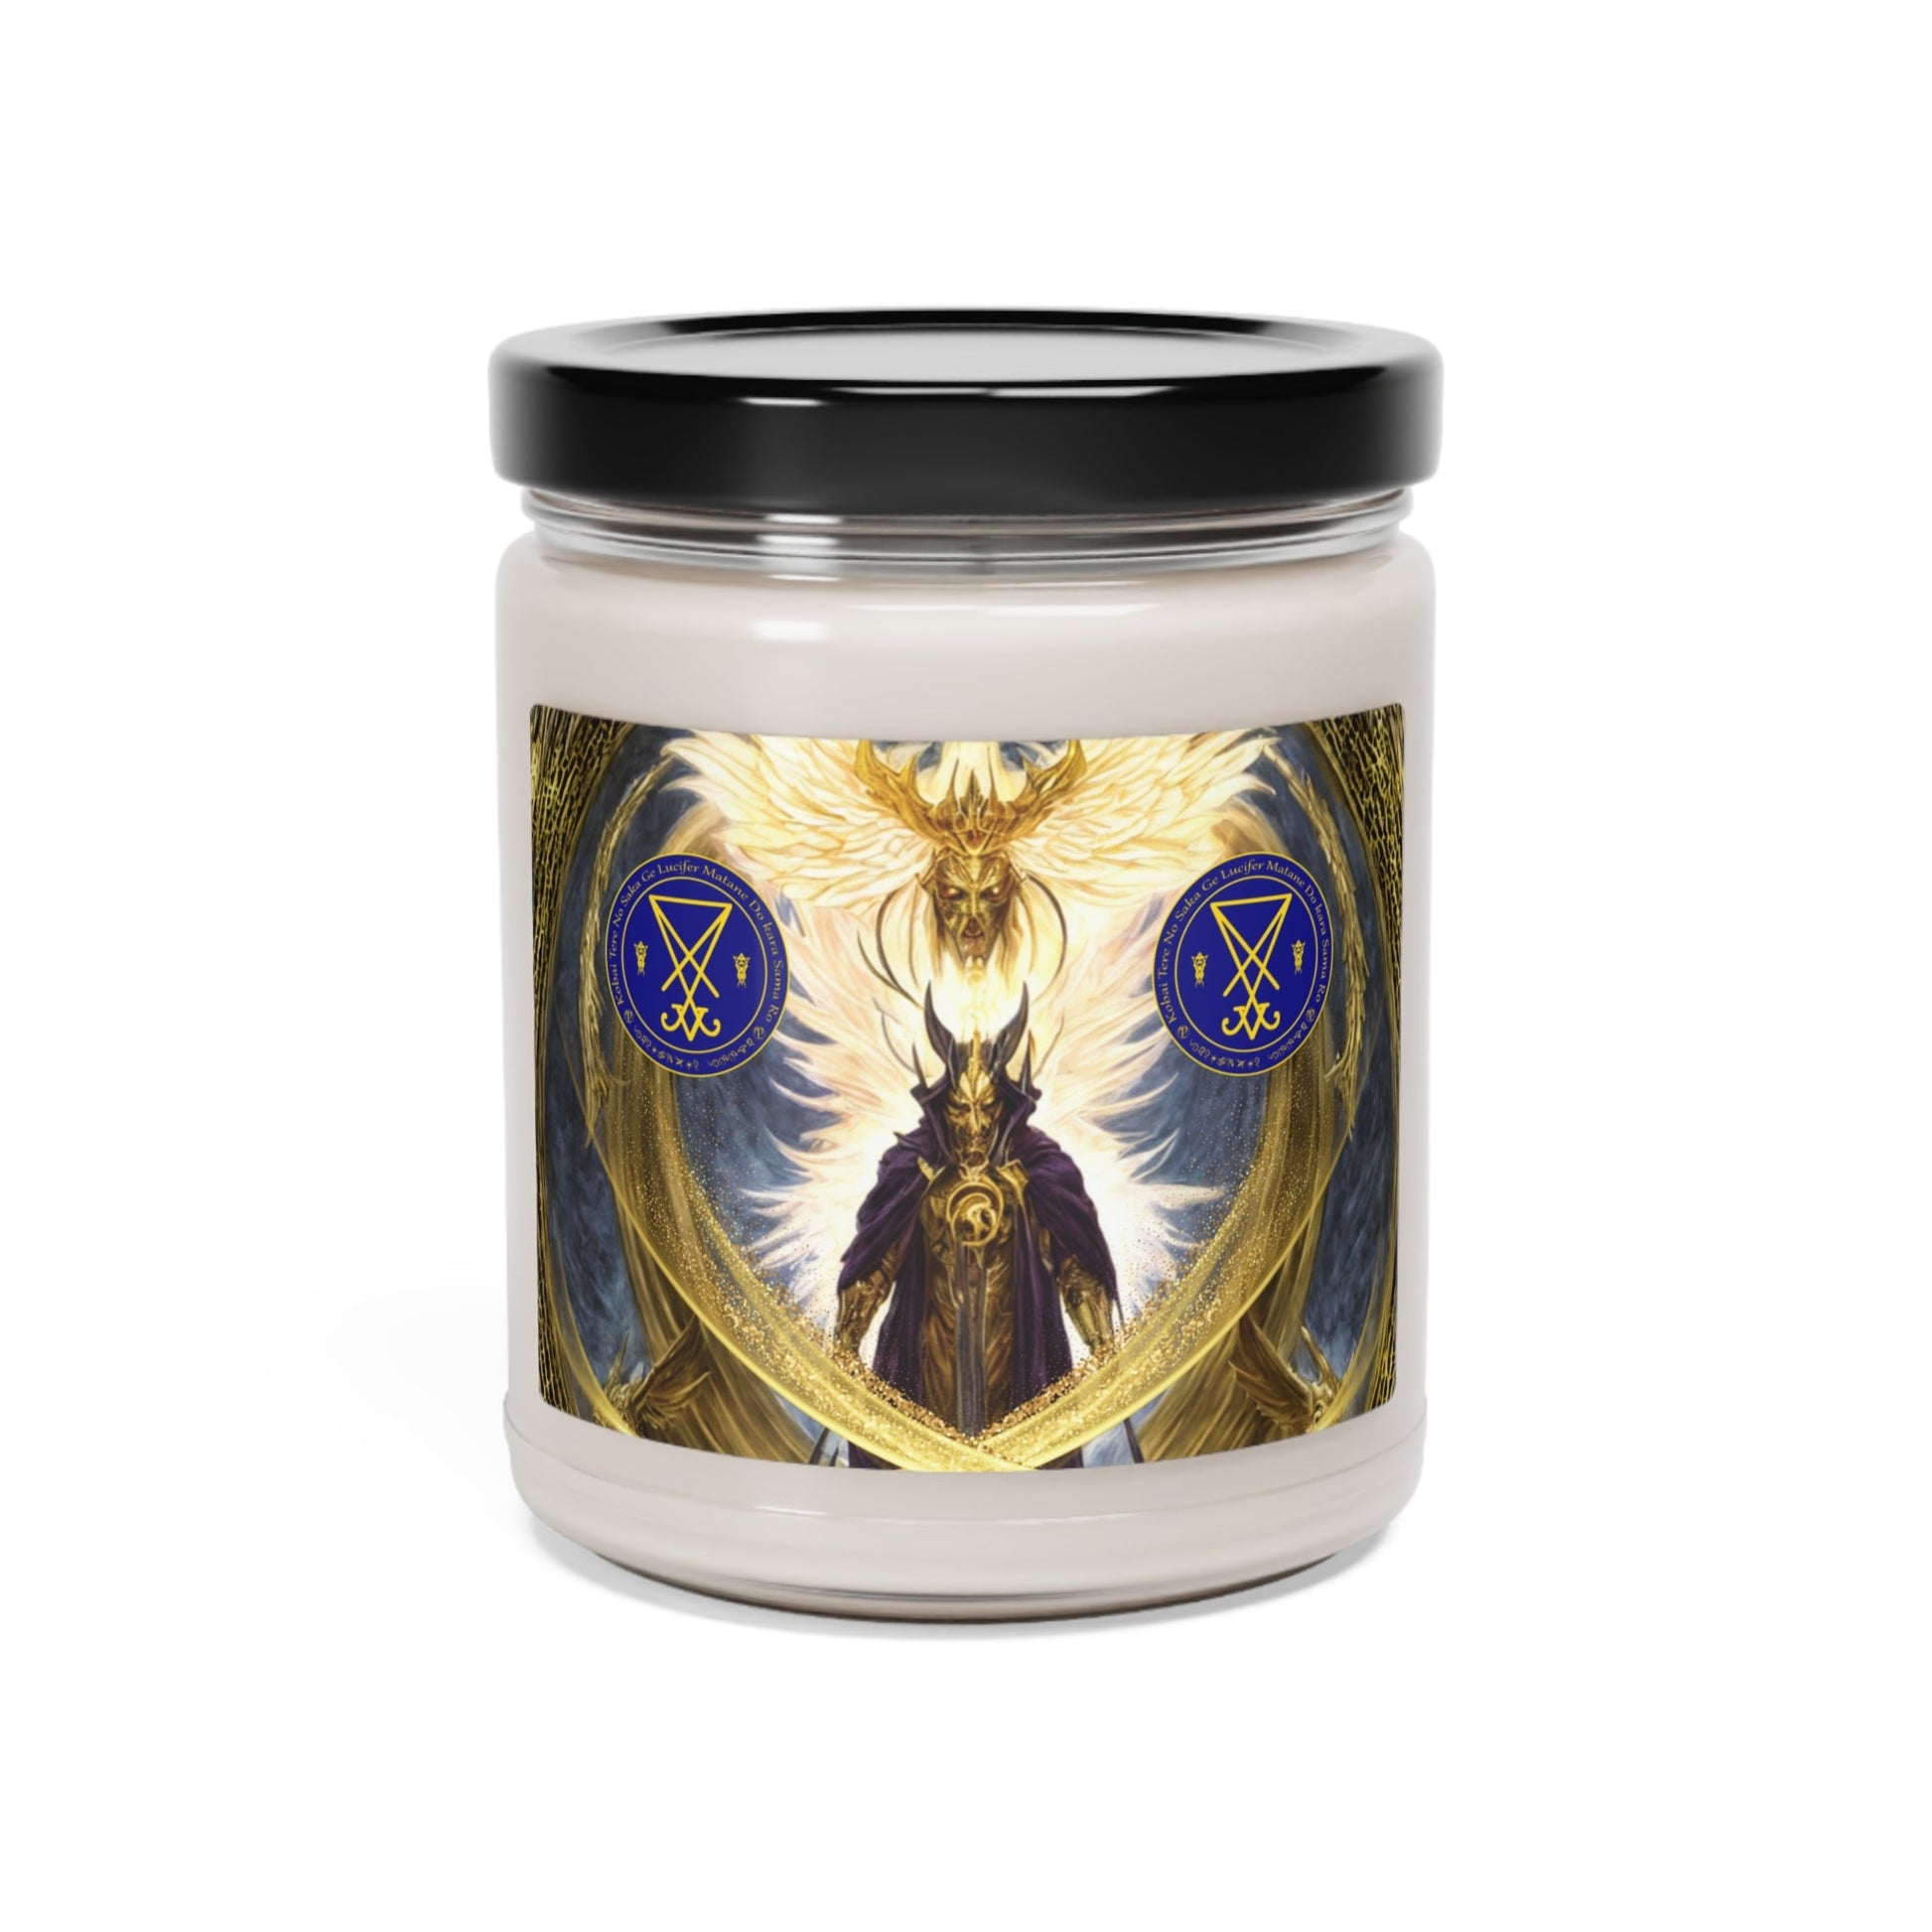 Demon-Lucifer-Scented-Soy-Candle-for-Altar-offerings-rituals-initiations-or-praying-and-meditation-11